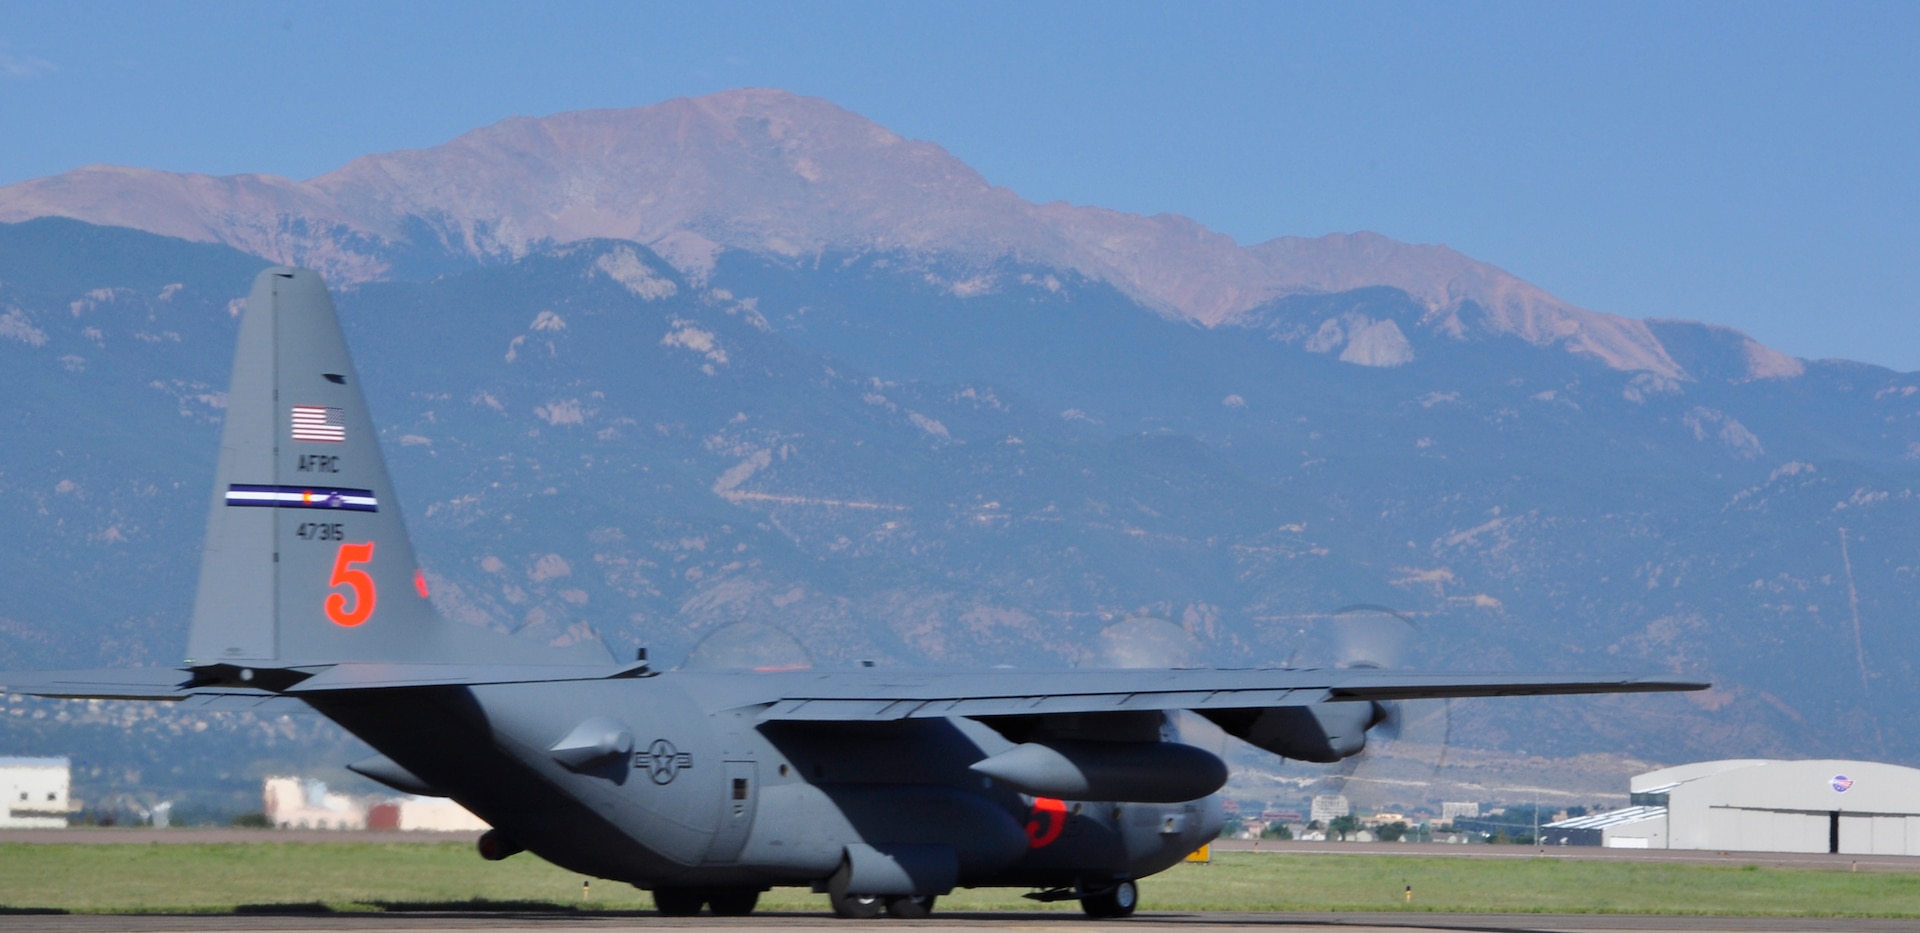 A 302nd Airlift Wing Modular Airborne Fire Fighting System-equipped C-130H taxis on the runway at Peterson Air Force Base early Aug. 3, 2016. MAFFS was activated to assist with fire fighting efforts in the Western states. This is the first MAFFS activation of the season. (U.S. Air Force photo/Daniel Butterfield) 